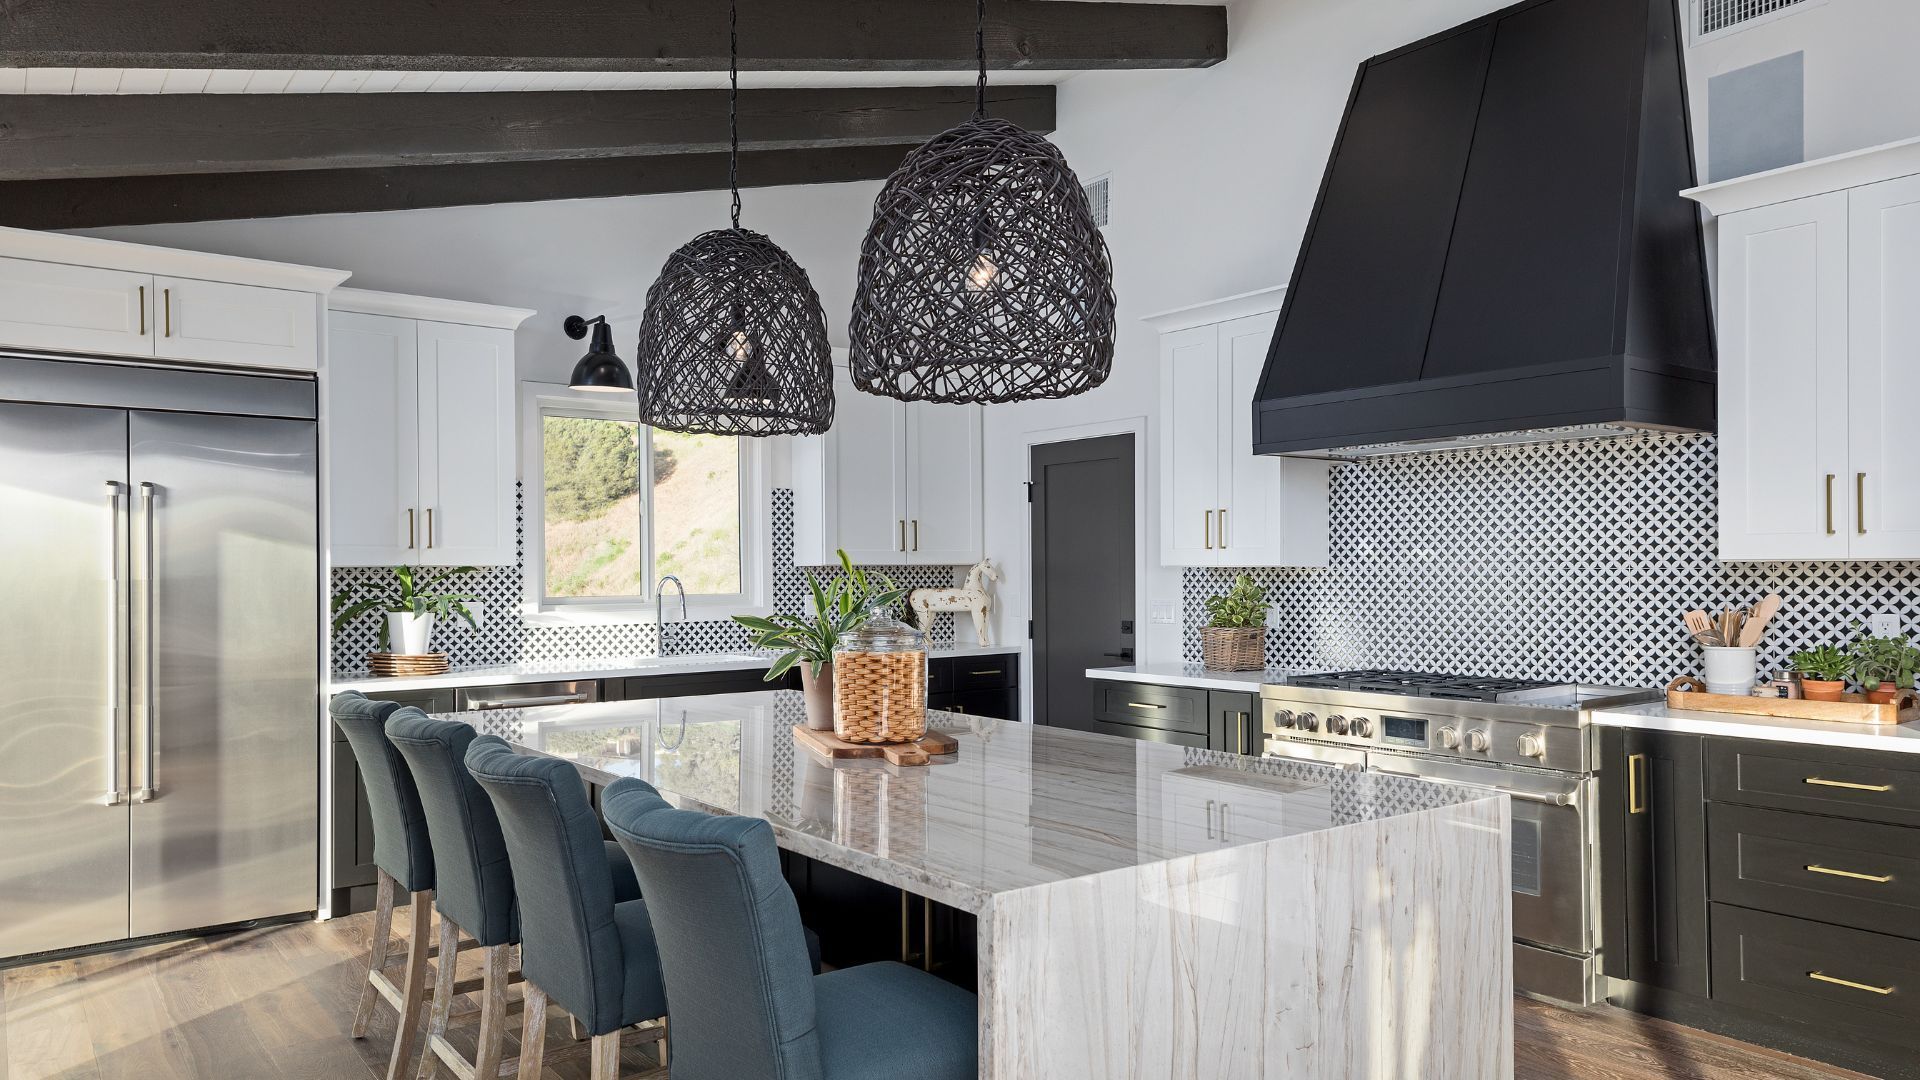 Modern kitchen with white cabinets, marble island, and unique black wicker lights.